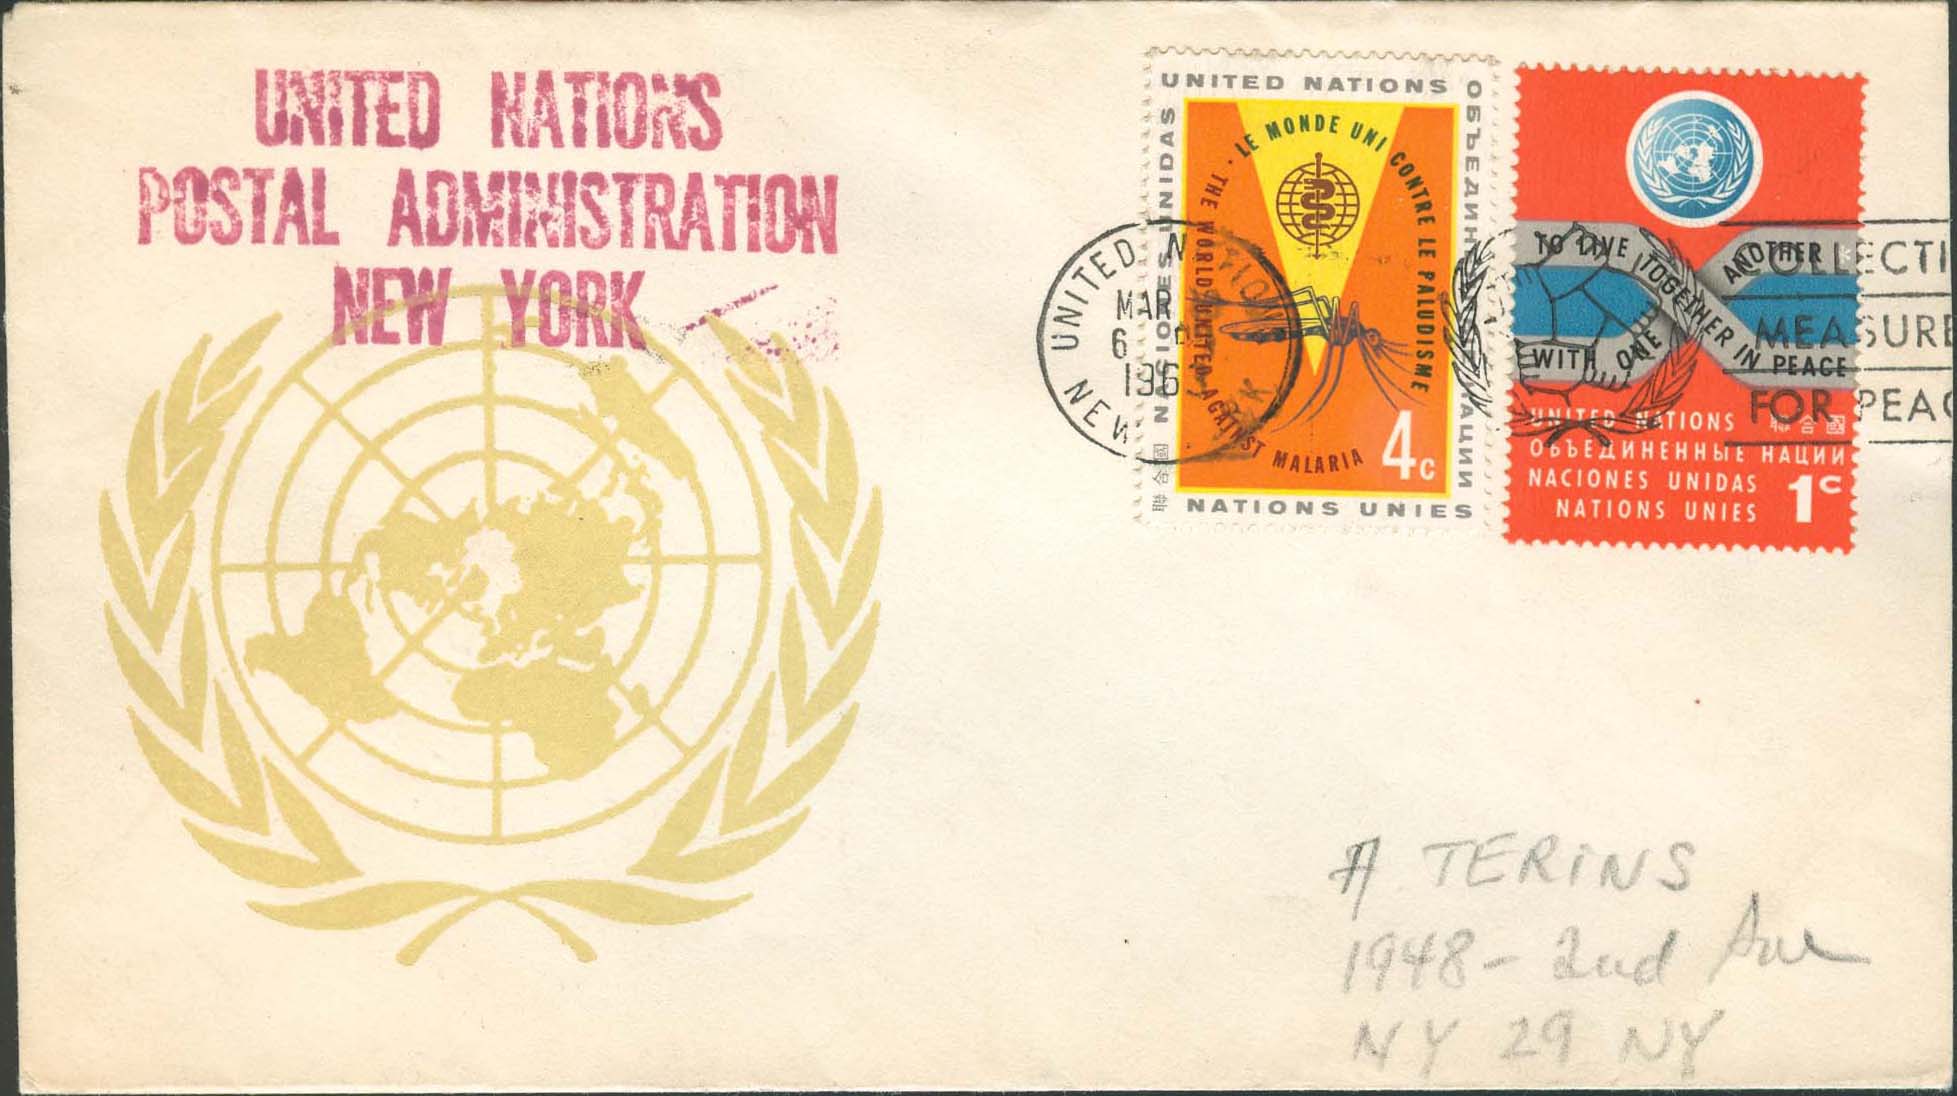 Scott 102 2nd print - March 18 or 19,1963 <br />Machine slogan "Collective Measures for Peace"<br />UN Postal Administration rubber stamped return address